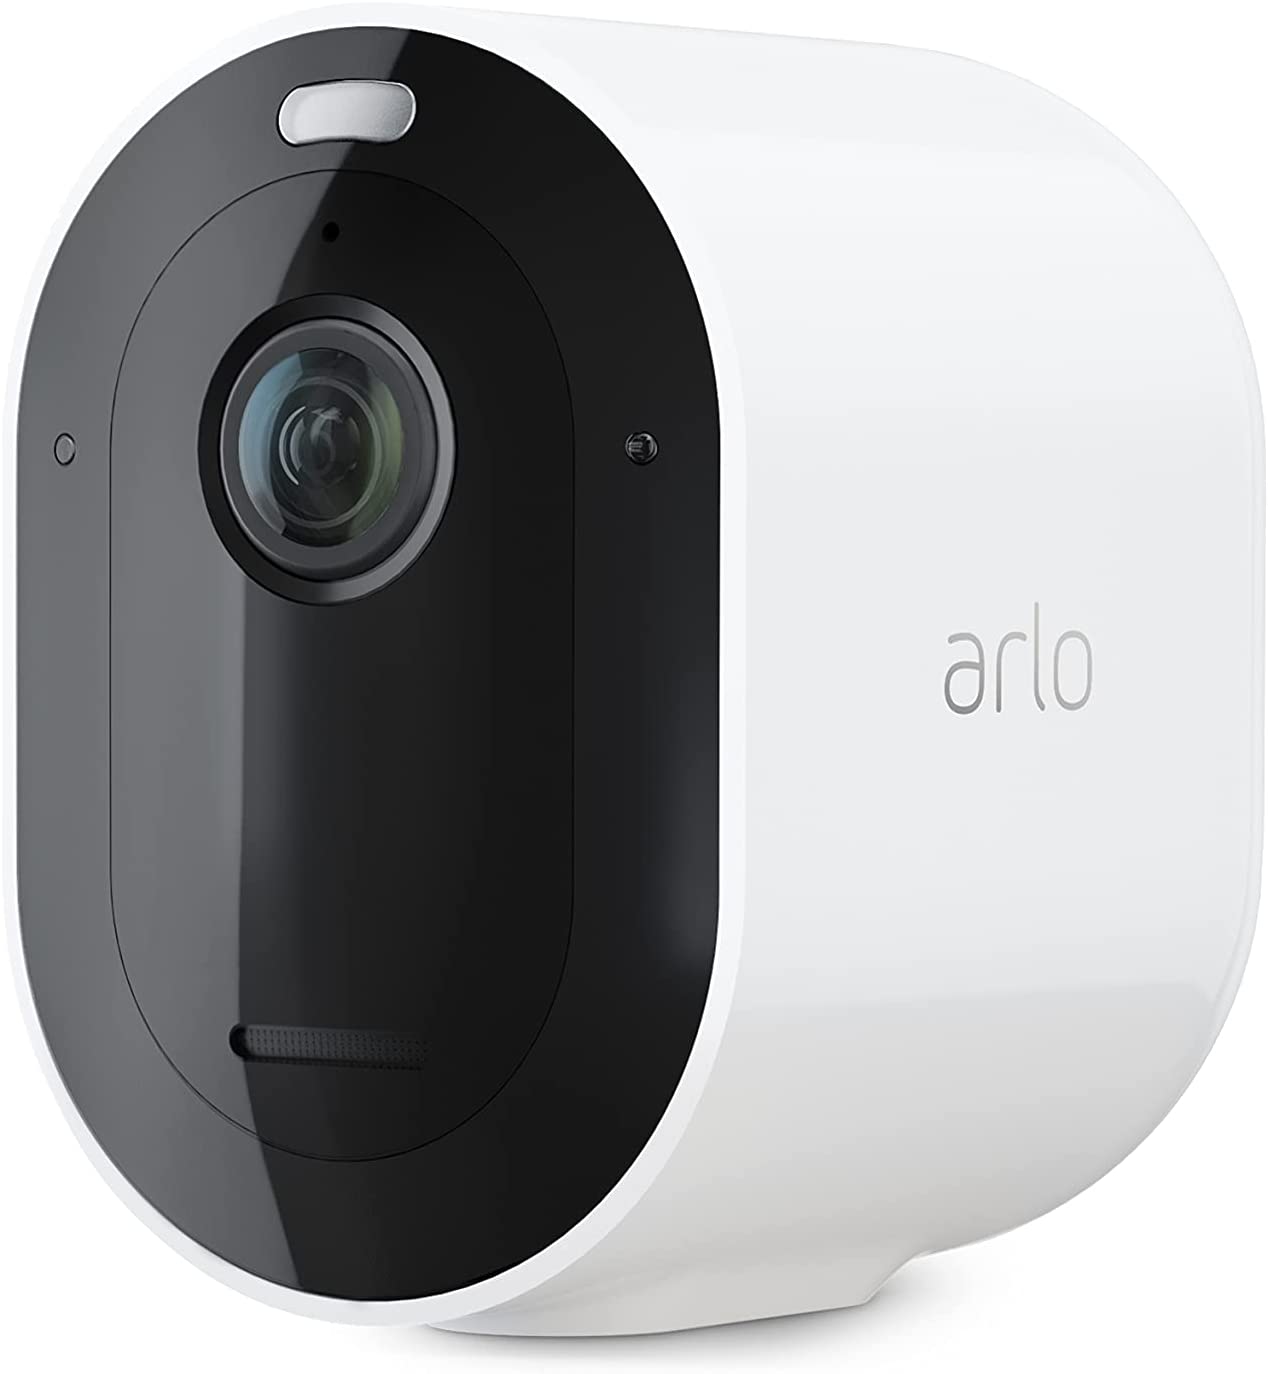 Arlo VMC4350P-100NAR Pro 4 Spotlight Camera 3 Pack Security HDR Color Night Vision 2 Way Audio WiFi No Hub Needed White - Certified Refurbished